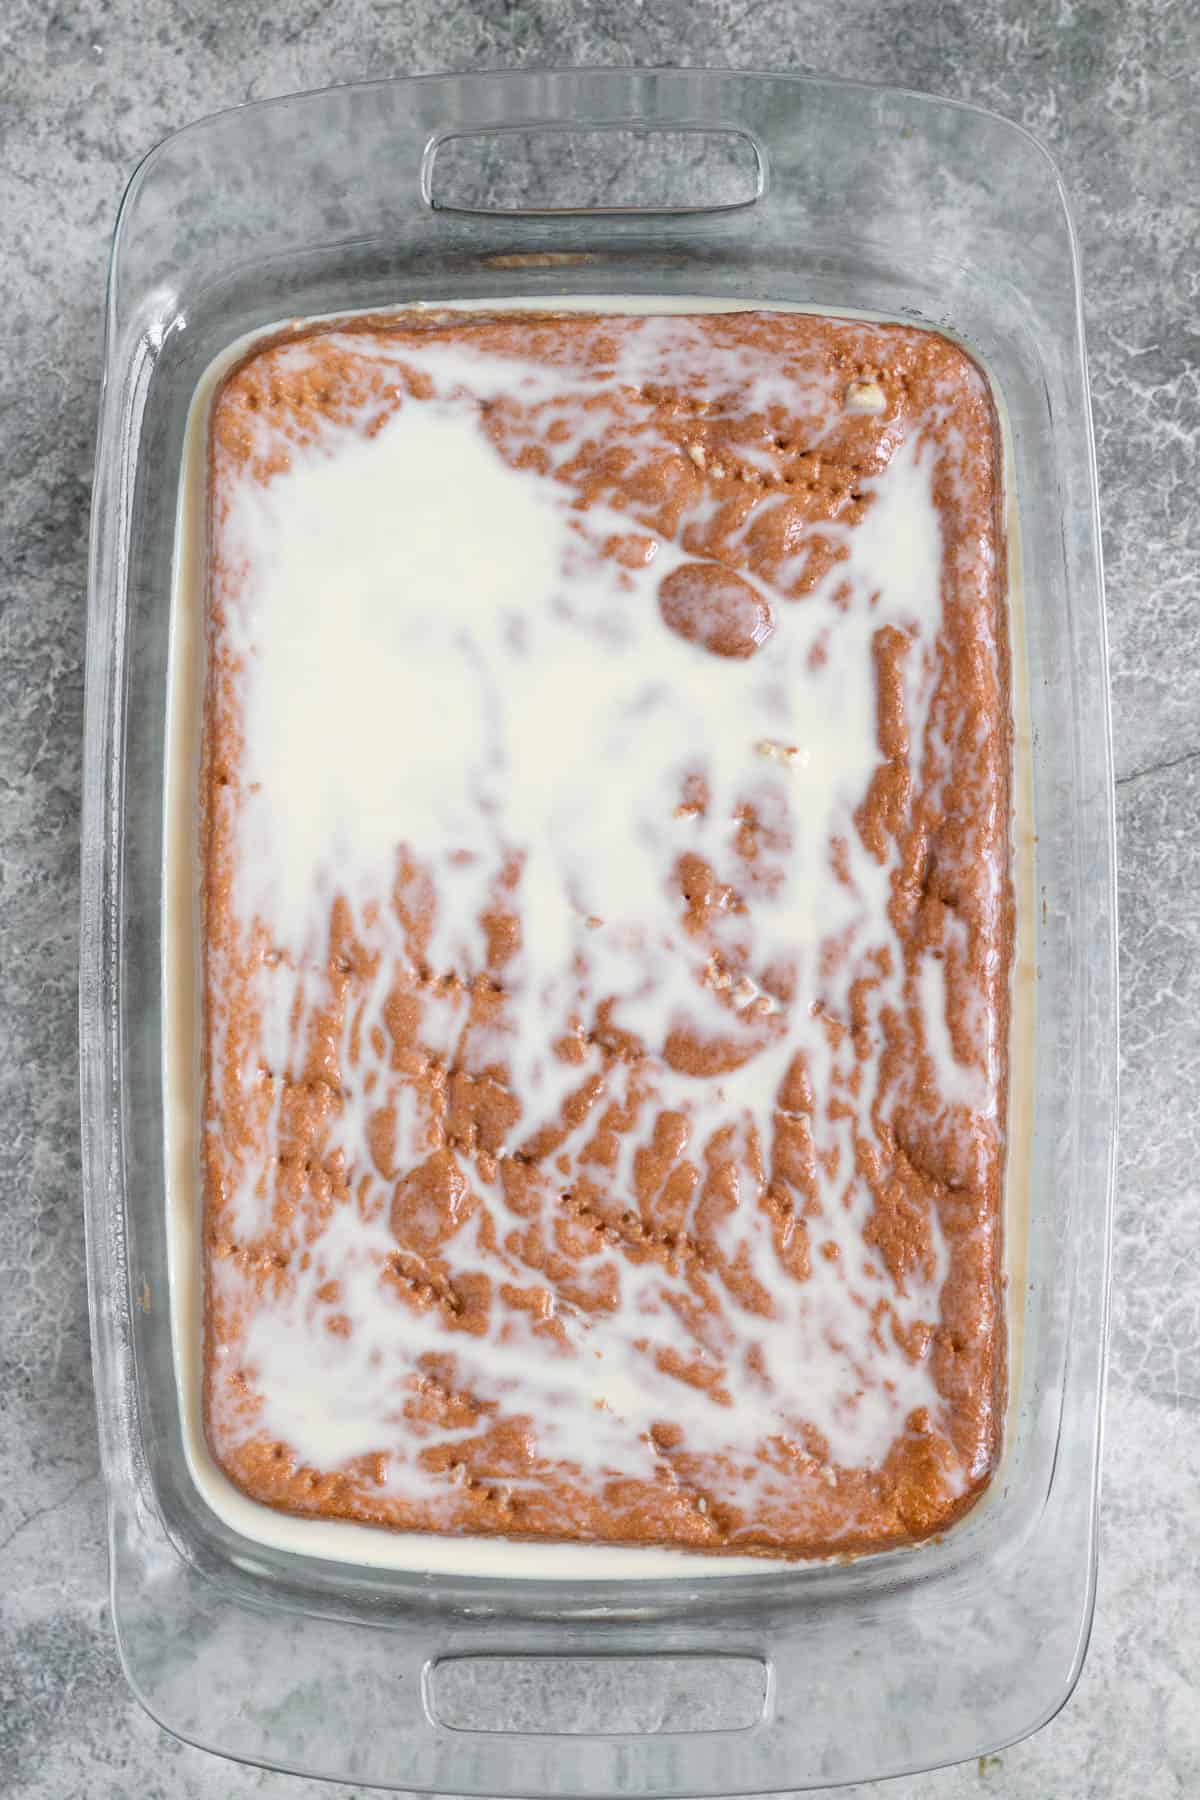 Cake with tres leches mixture poured over it